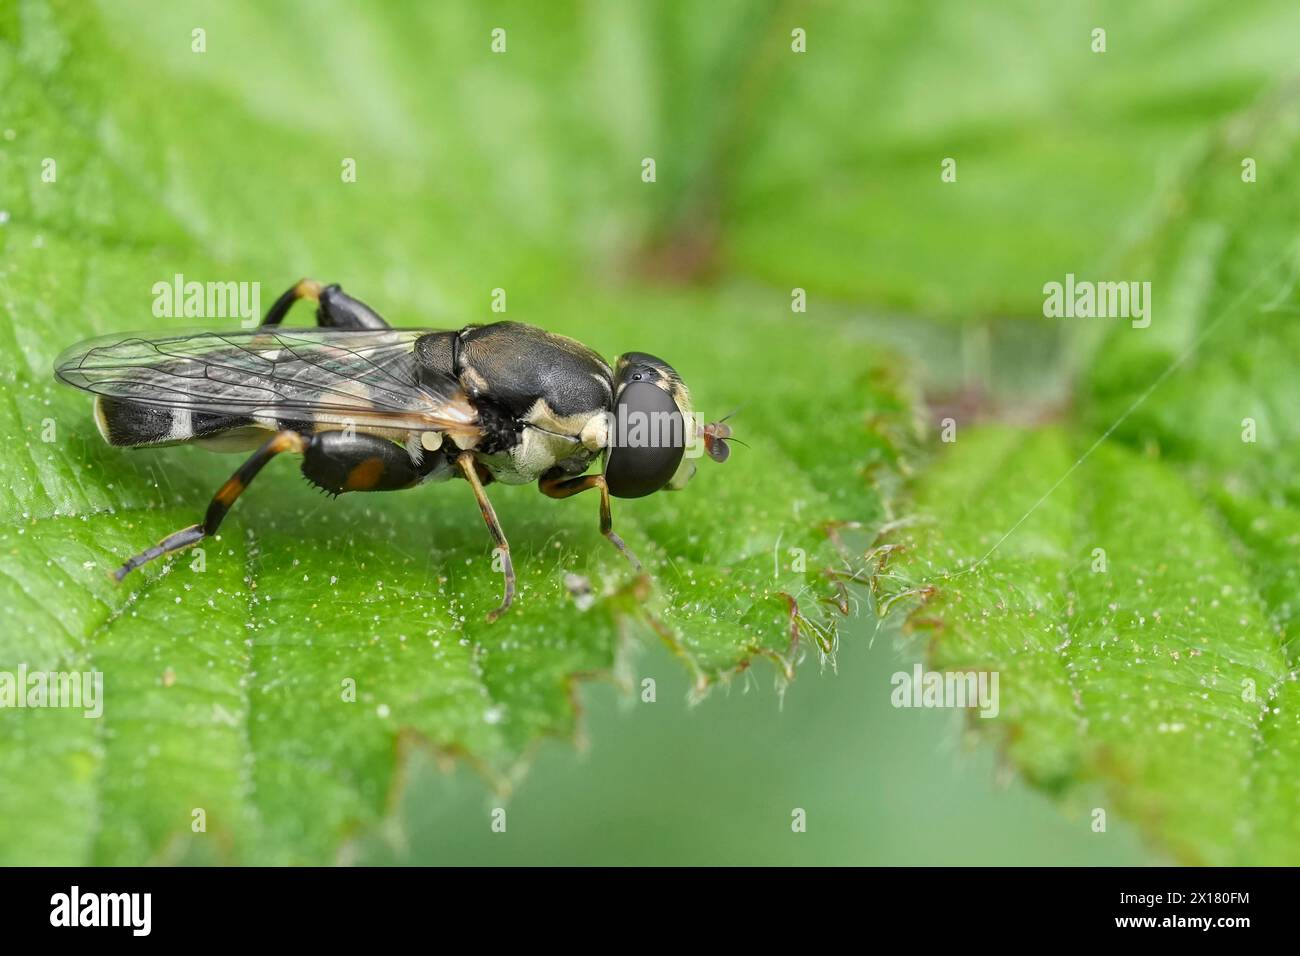 Natural extreme closeup on a European thick-legged hoverfly, Syritta pipiens, sitting on a green leaf Stock Photo